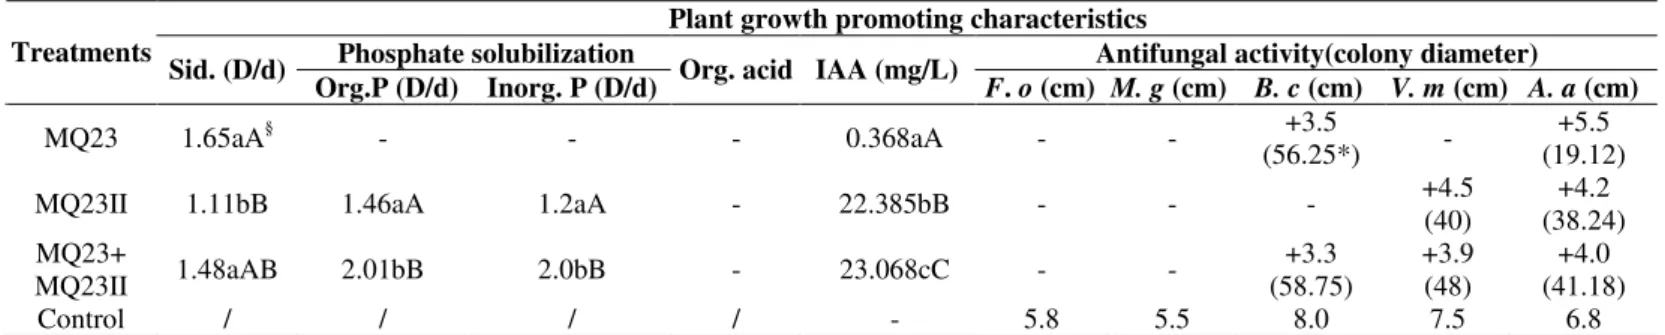 Table 1. Plant growth promoting characteristics of endophytes isolated from root nodules 